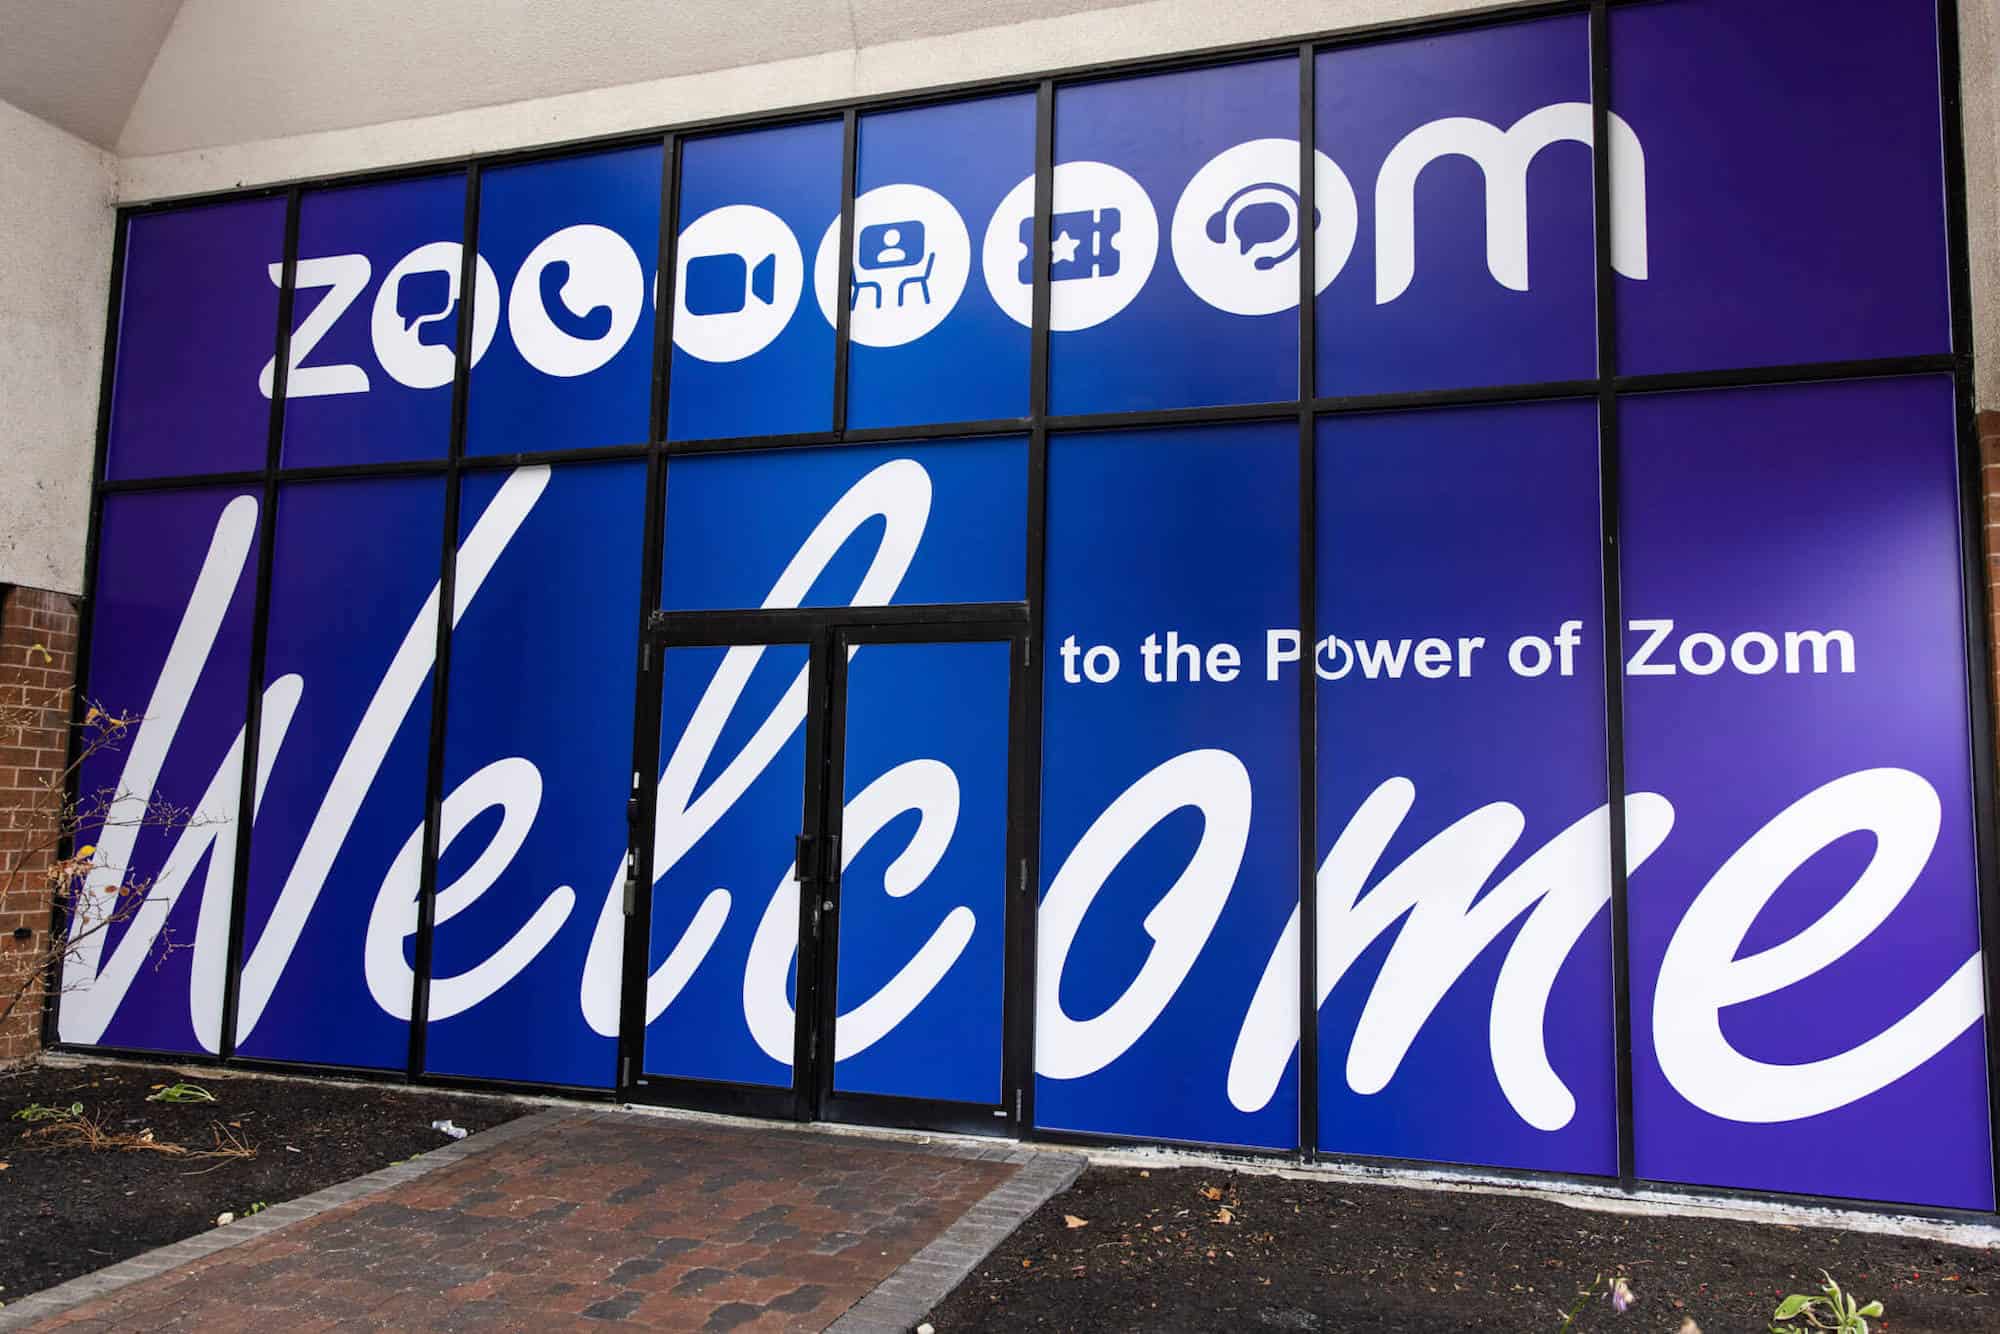 A close-up view of blue cling film trade show signage applied to the entrance to a brick building. White writing reads "Welcome to the Power of Zoom."